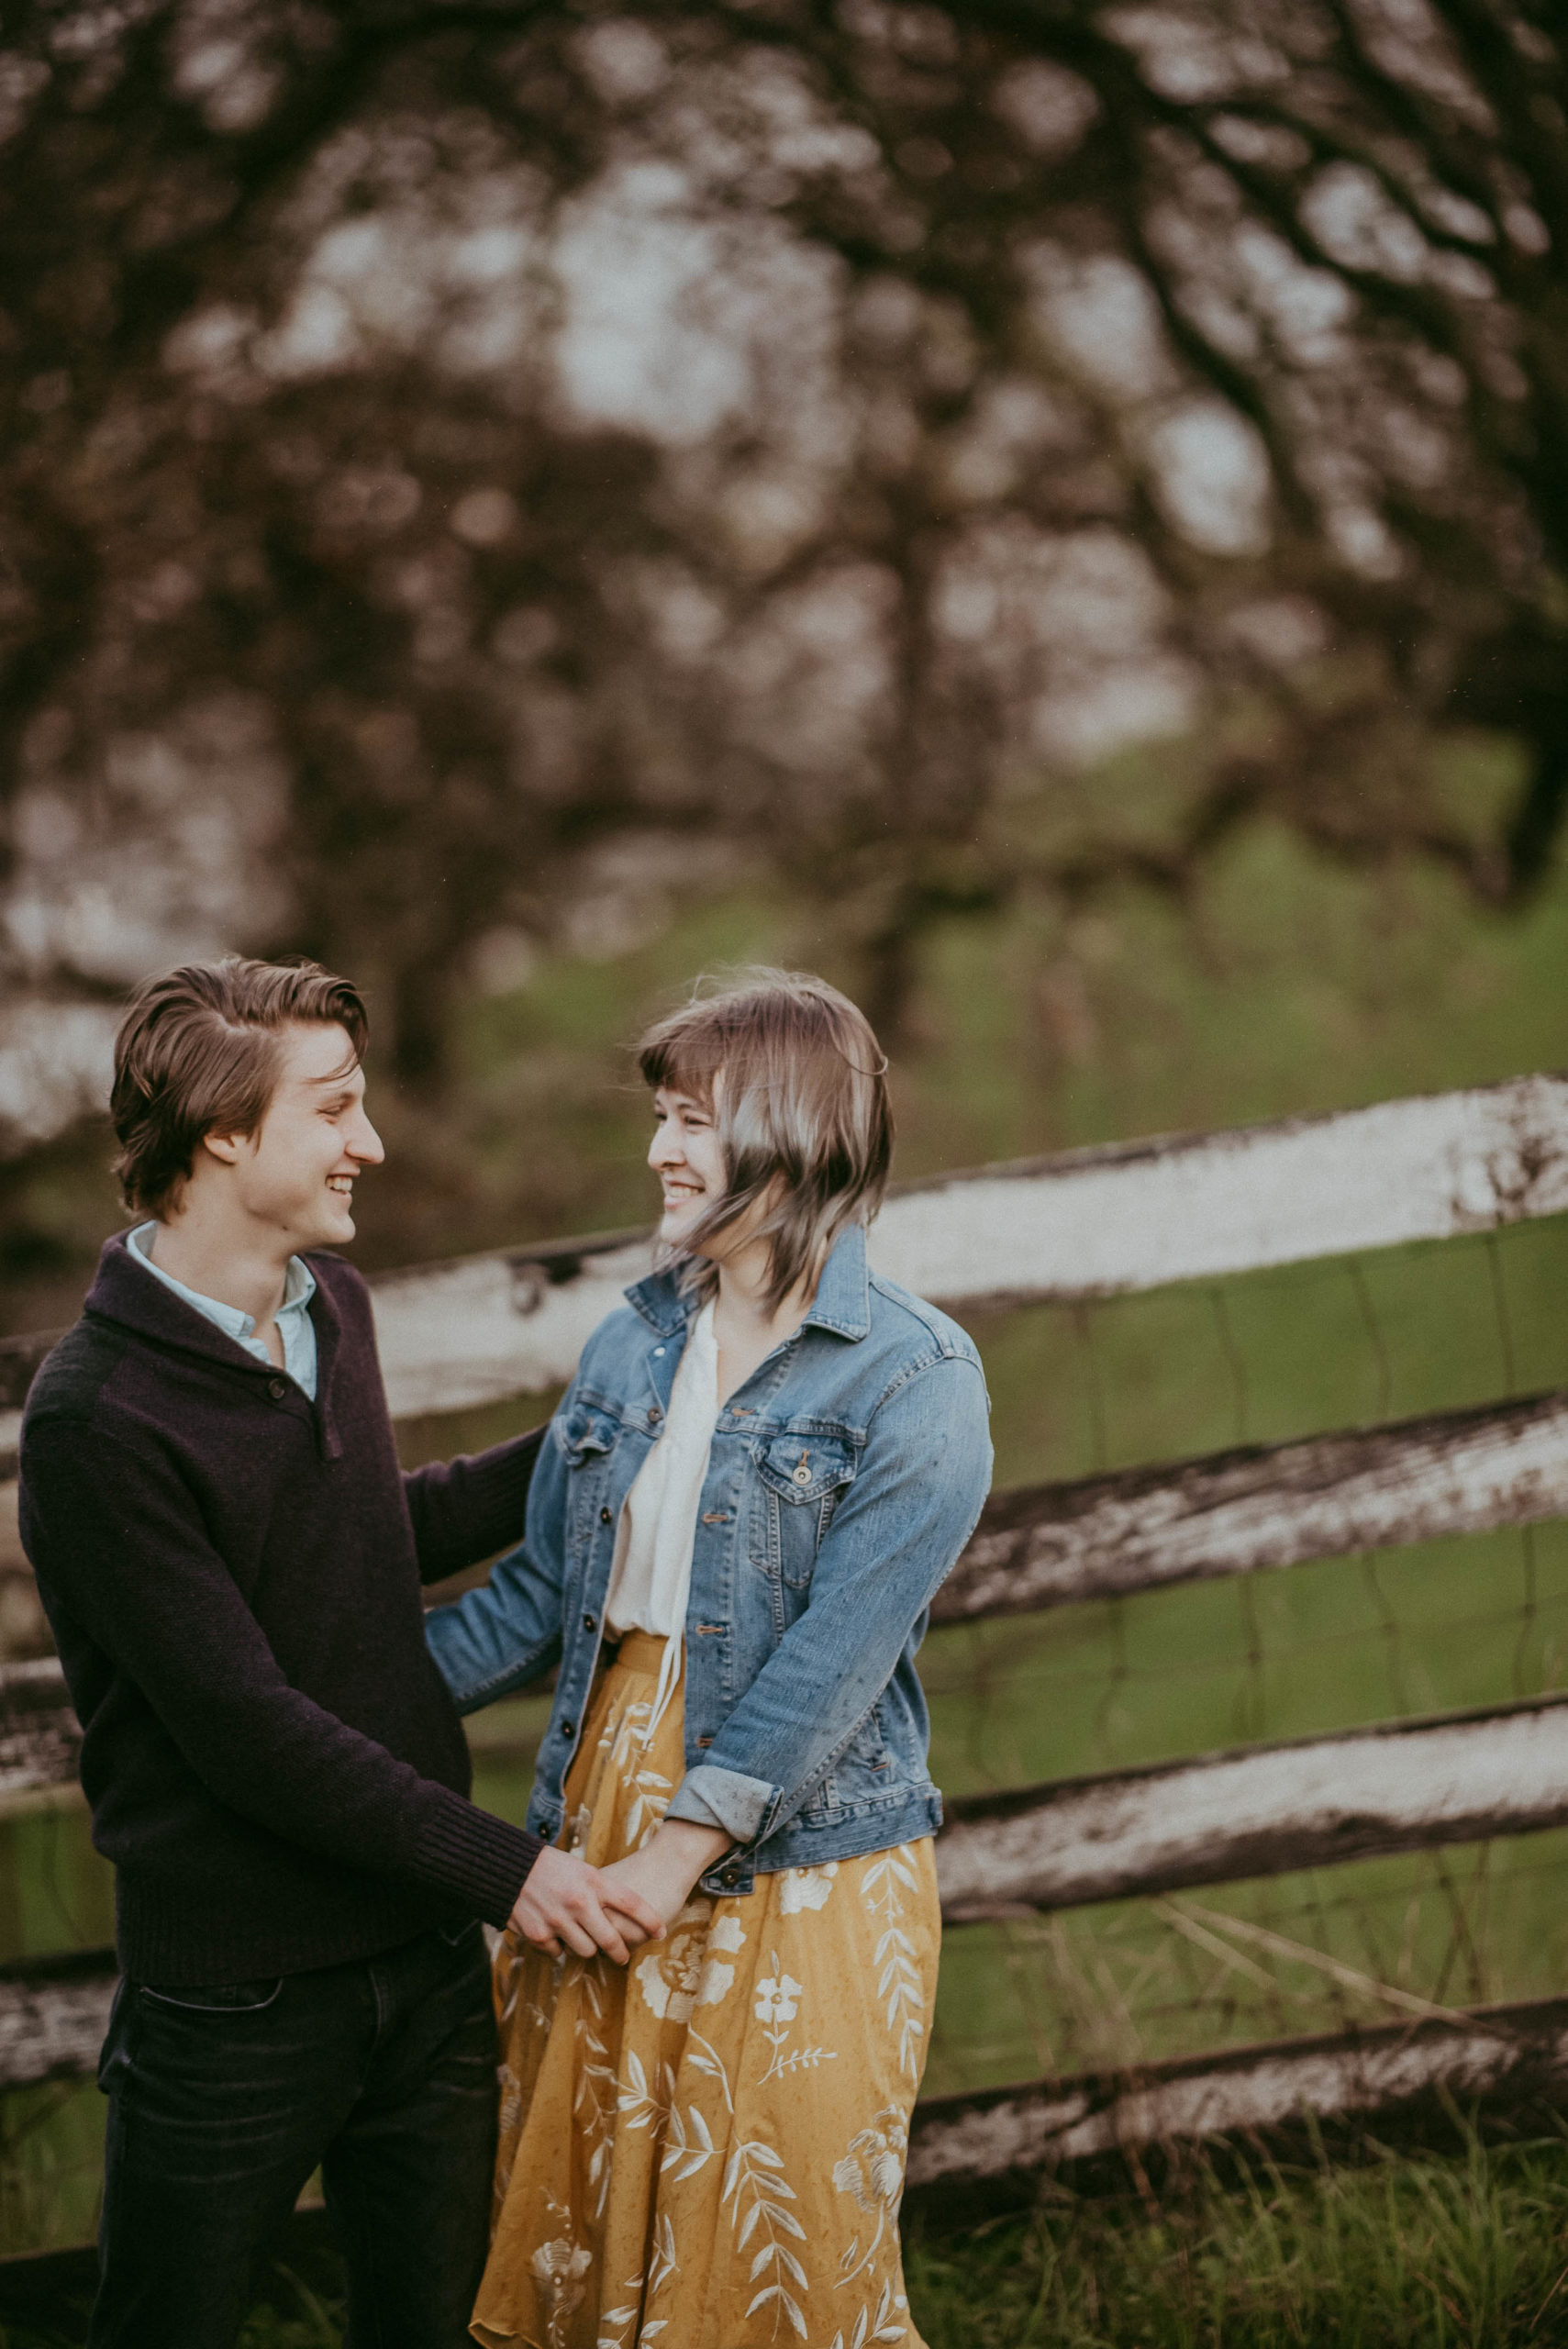 Lets_Spread_Beauty_Engagement Session20190212_000002.jpg